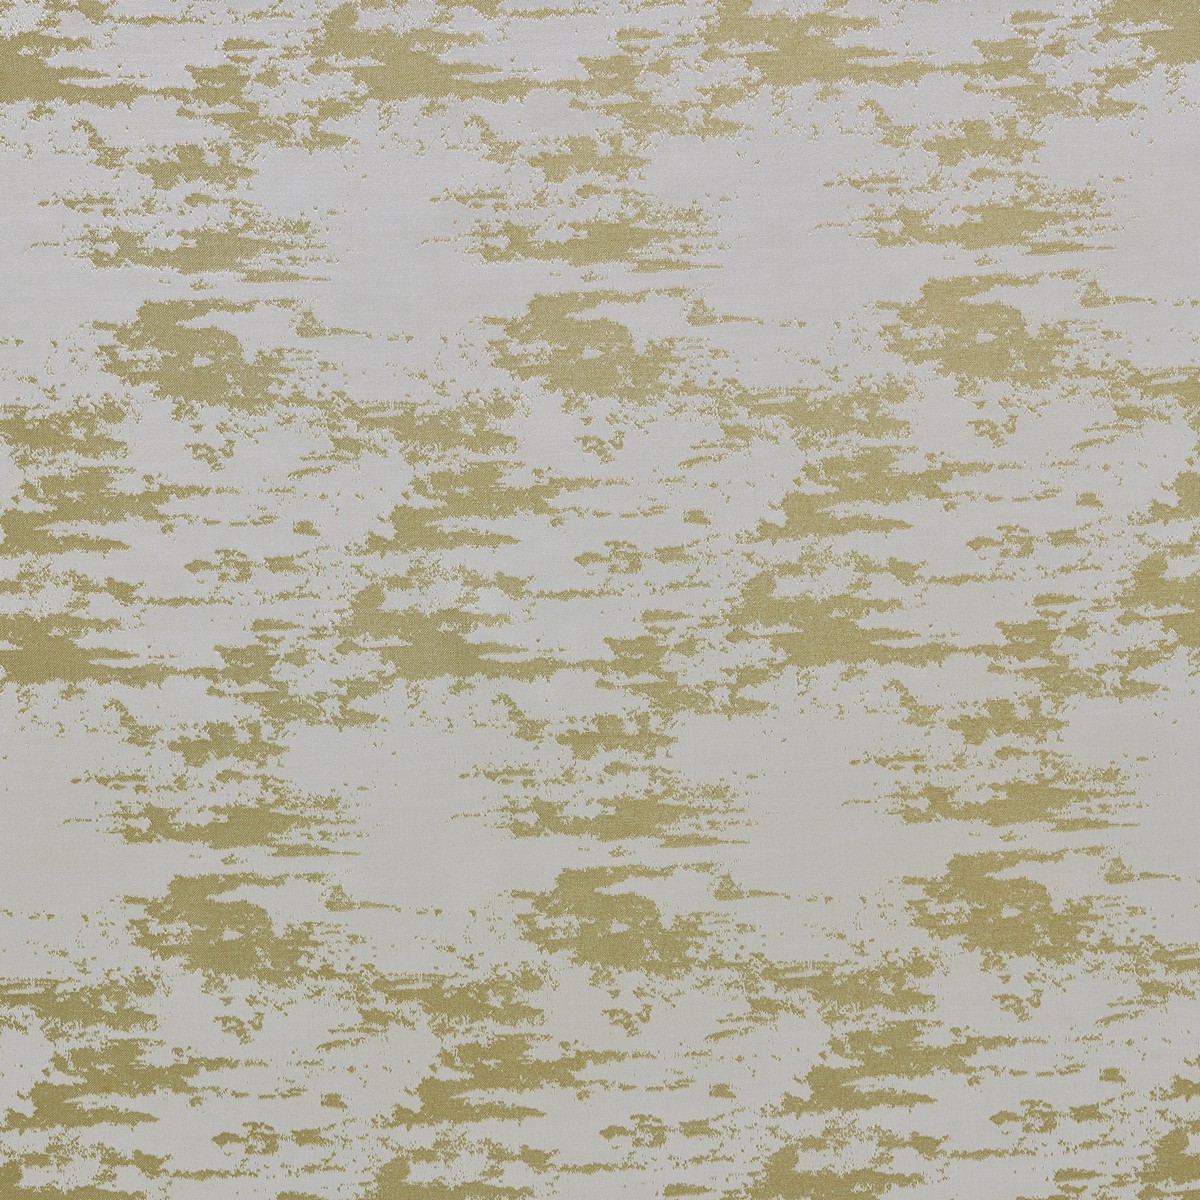 Hailes Olive Fabric by Ashley Wilde